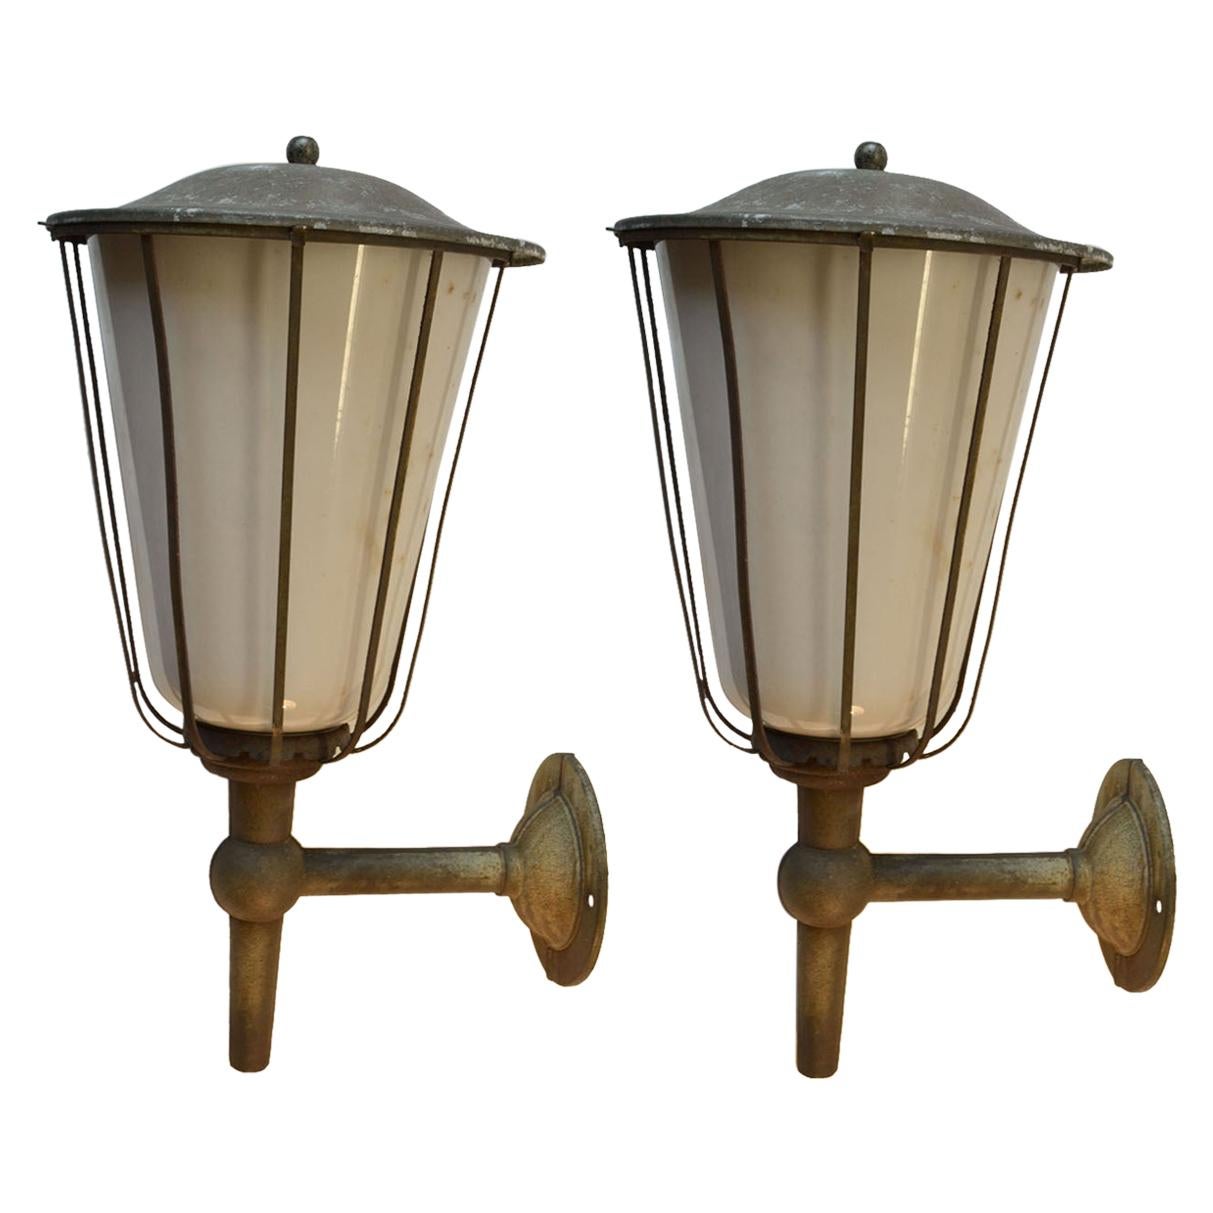 Pair of Large Outdoor Lanterns, Metal & White Glass, Early 20th Century, France